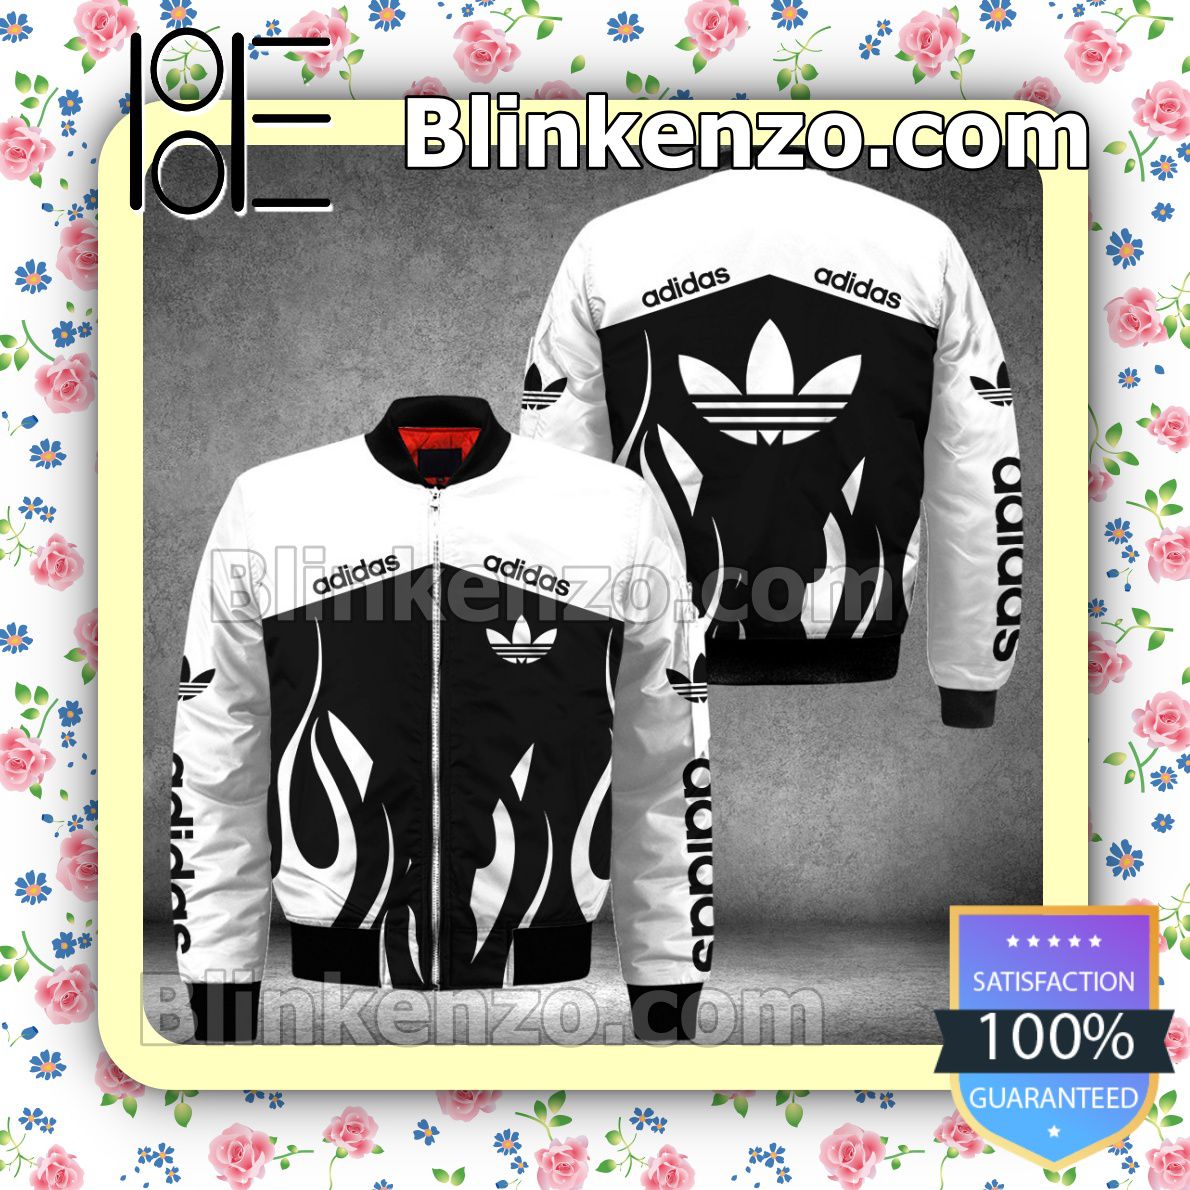 Adidas Fire Pattern Black And White Military Jacket Sportwear